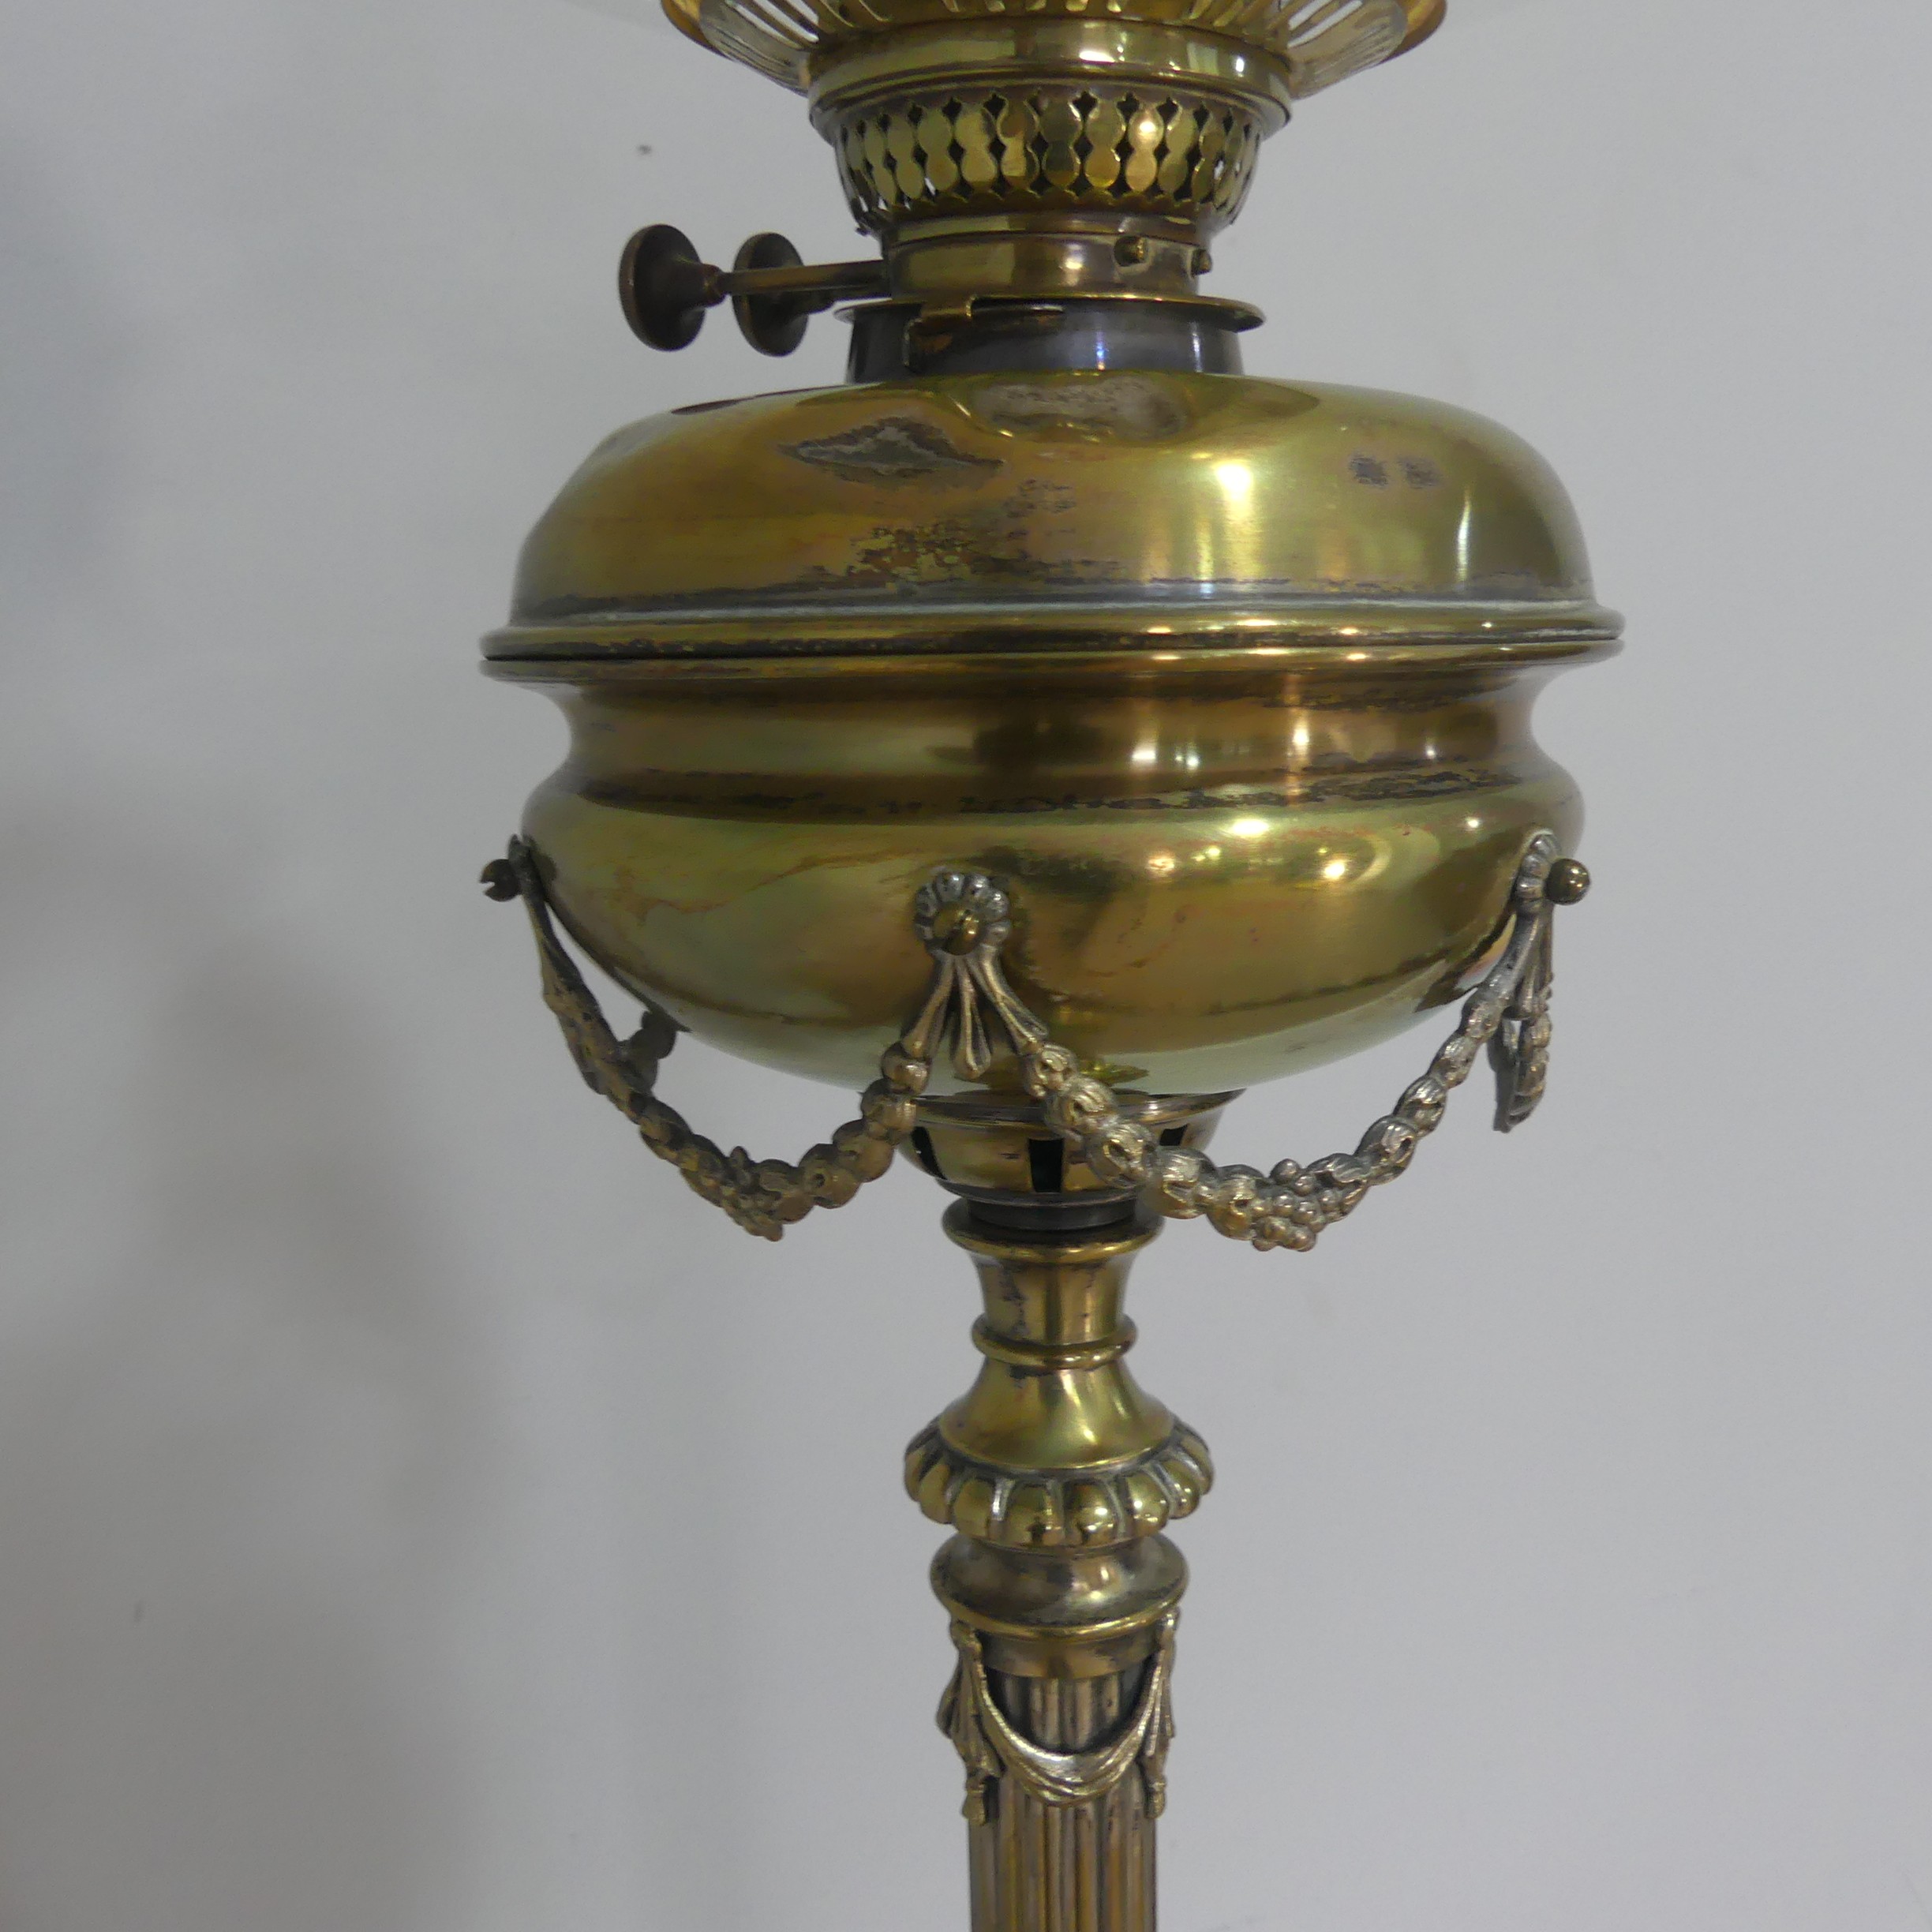 A Late 19thC/Early 20thC Brass standard Oil Lamp, with decorative reeded column, brass font and - Image 5 of 9